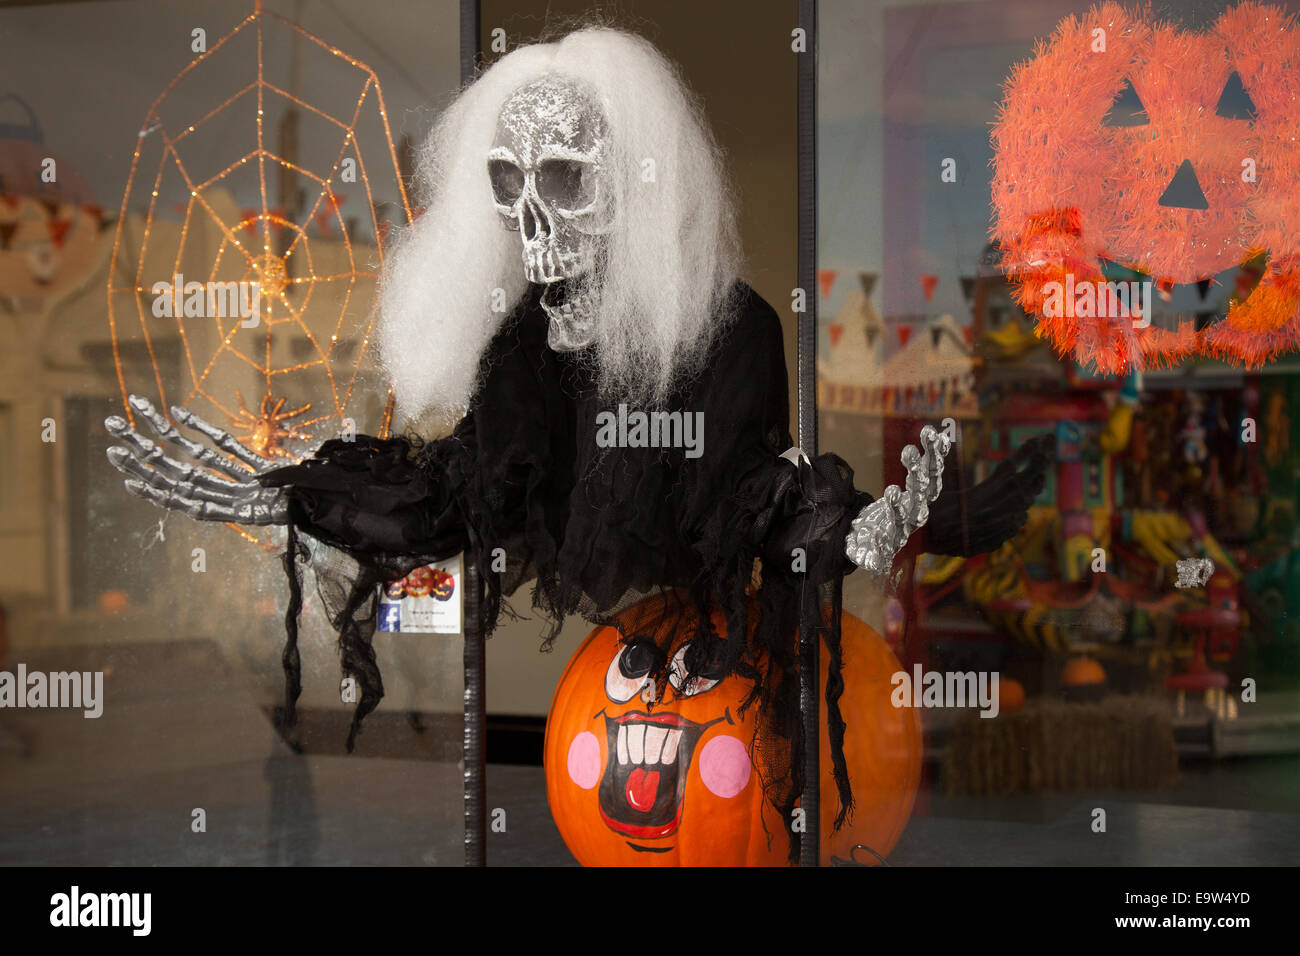 Southport, Merseyside, UK. 2nd November, 2014. Ghostly Skeleton figure with white hair at Happy Halloween event Pleasureland.  The last day of opening for the 2014 season saw a myriad of characters Painting Pumpkins, Pumpkin Painting, Pumpkin Art, Pumpkin Ideas, Pumpkin Crafts, Wooden Pumpkins, Carved Pumpkins, Painted Pumpkin Faces, Pumpkin People on display. Stock Photo